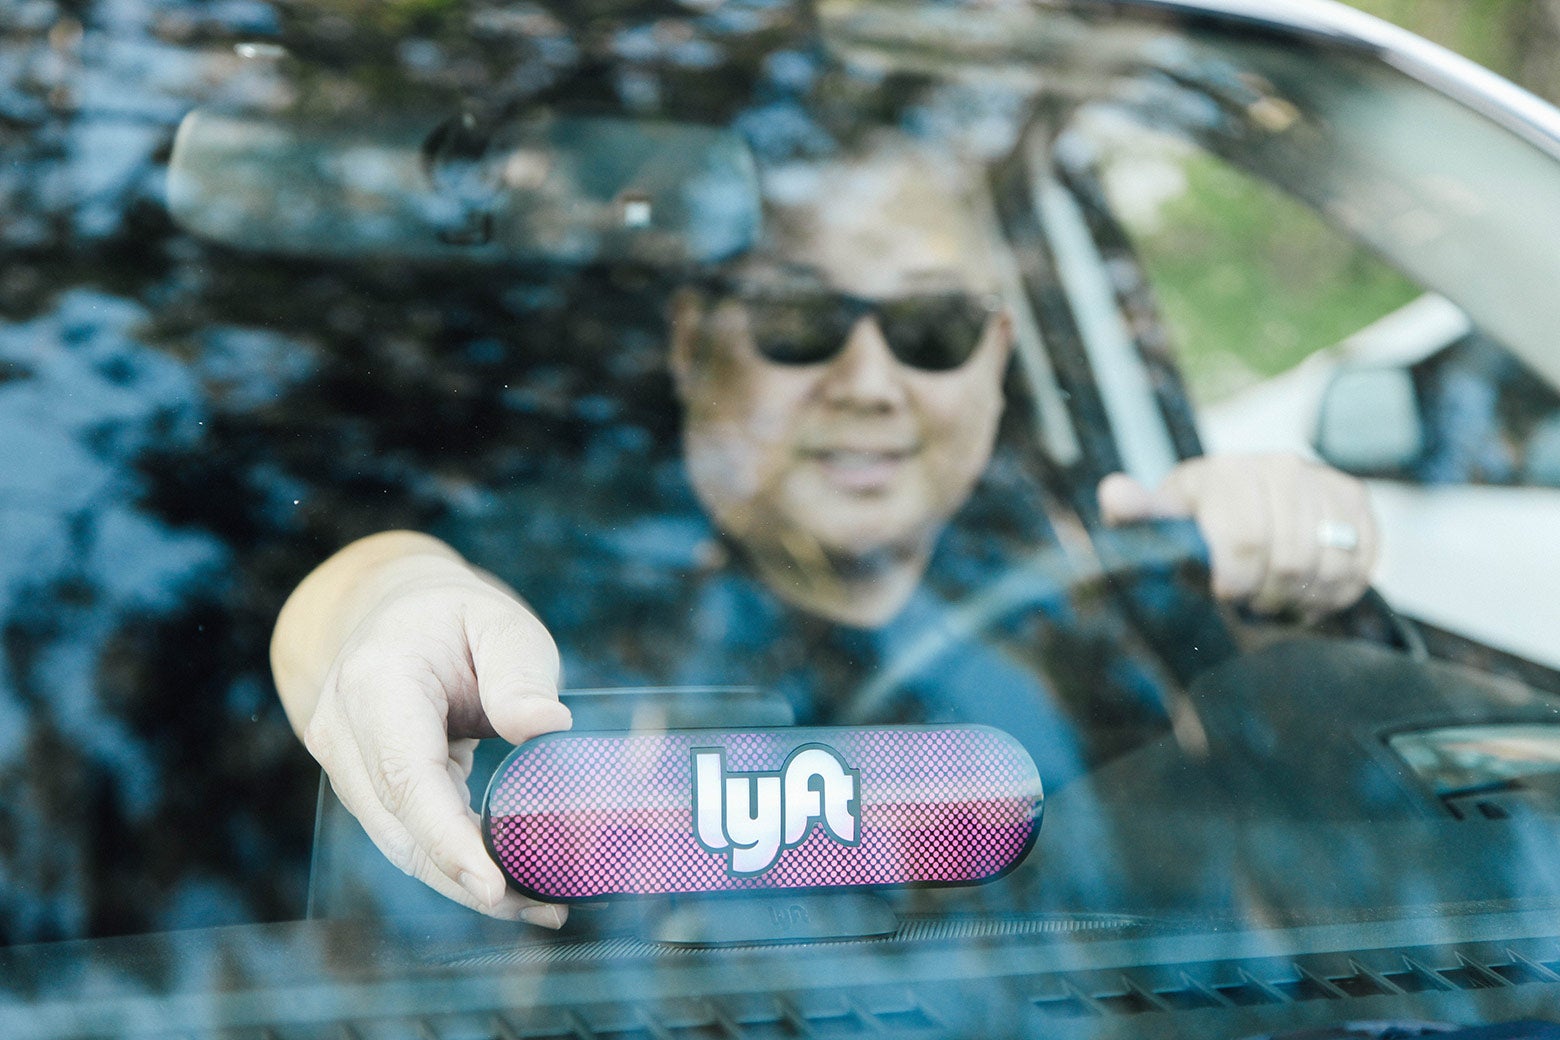 A Lyft driver places the Amp on his dashboard on January 31, 2017 in San Francisco, California.